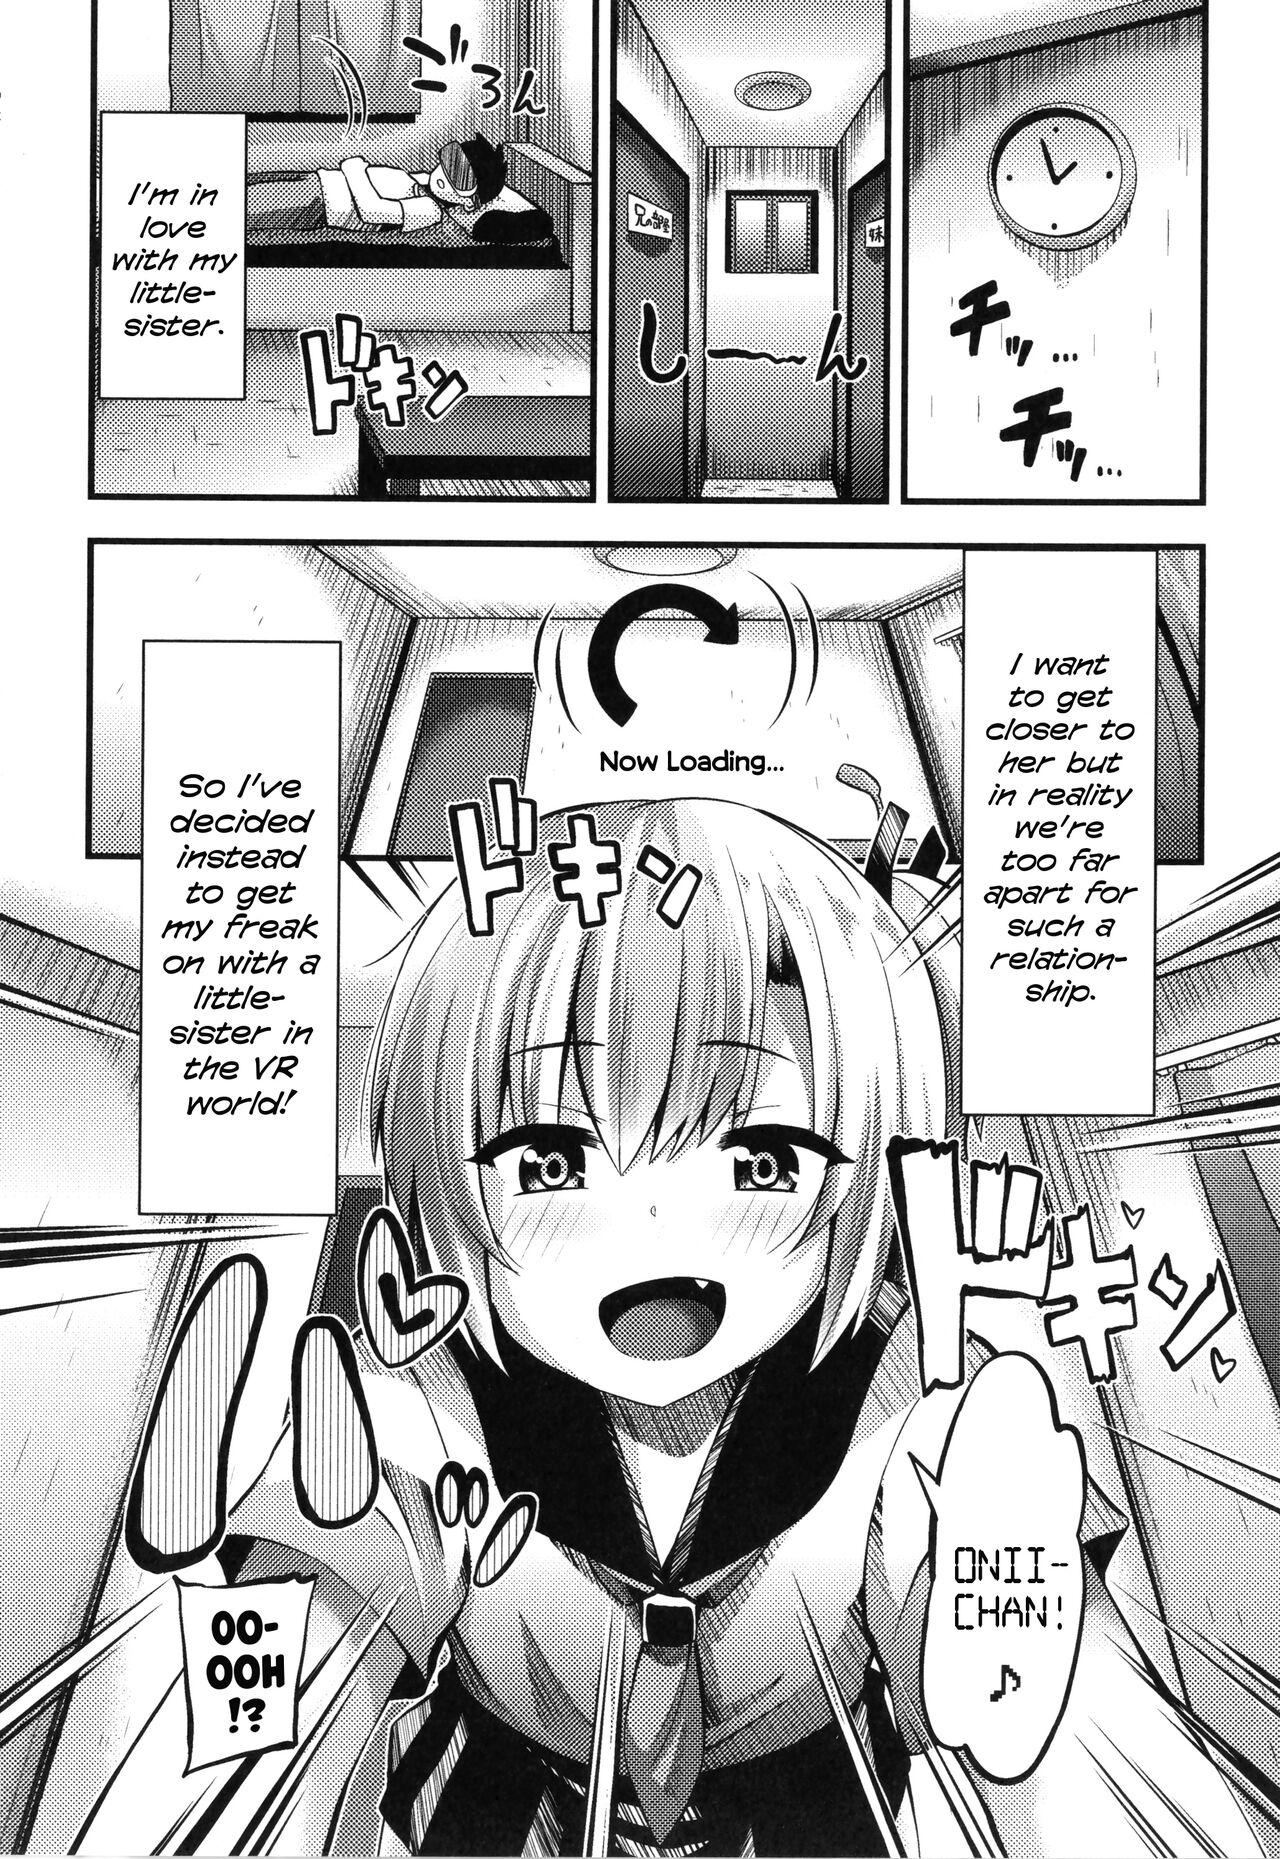 Tight Cunt VR Imouto wa Sugu Soko ni | My VR Little-Sister is Just Around the Corner Cbt - Page 4